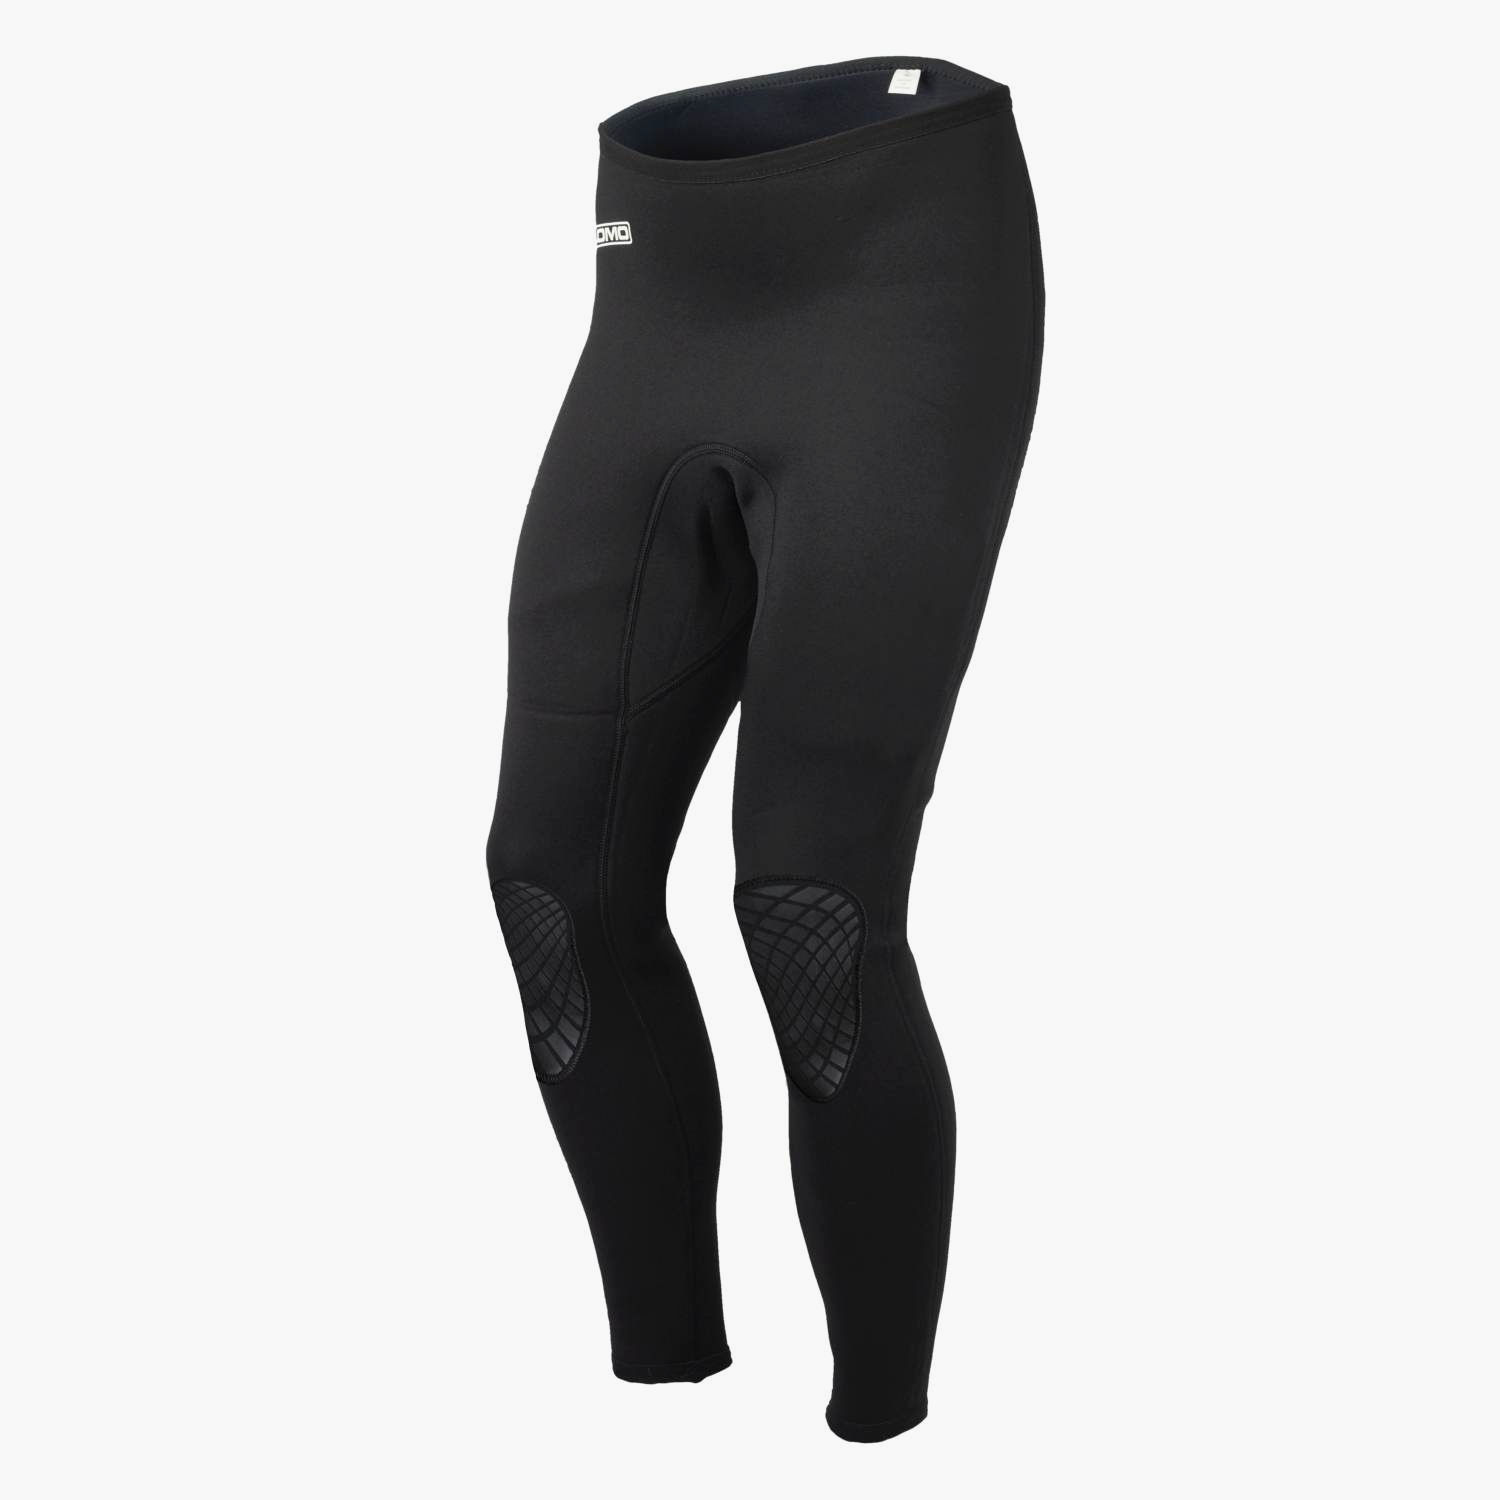 2023 ONeill Womens Bahia 2mm Wetsuit Trousers 5493  Black  Demi Floral   Wetsuit  Wetsuit Outlet